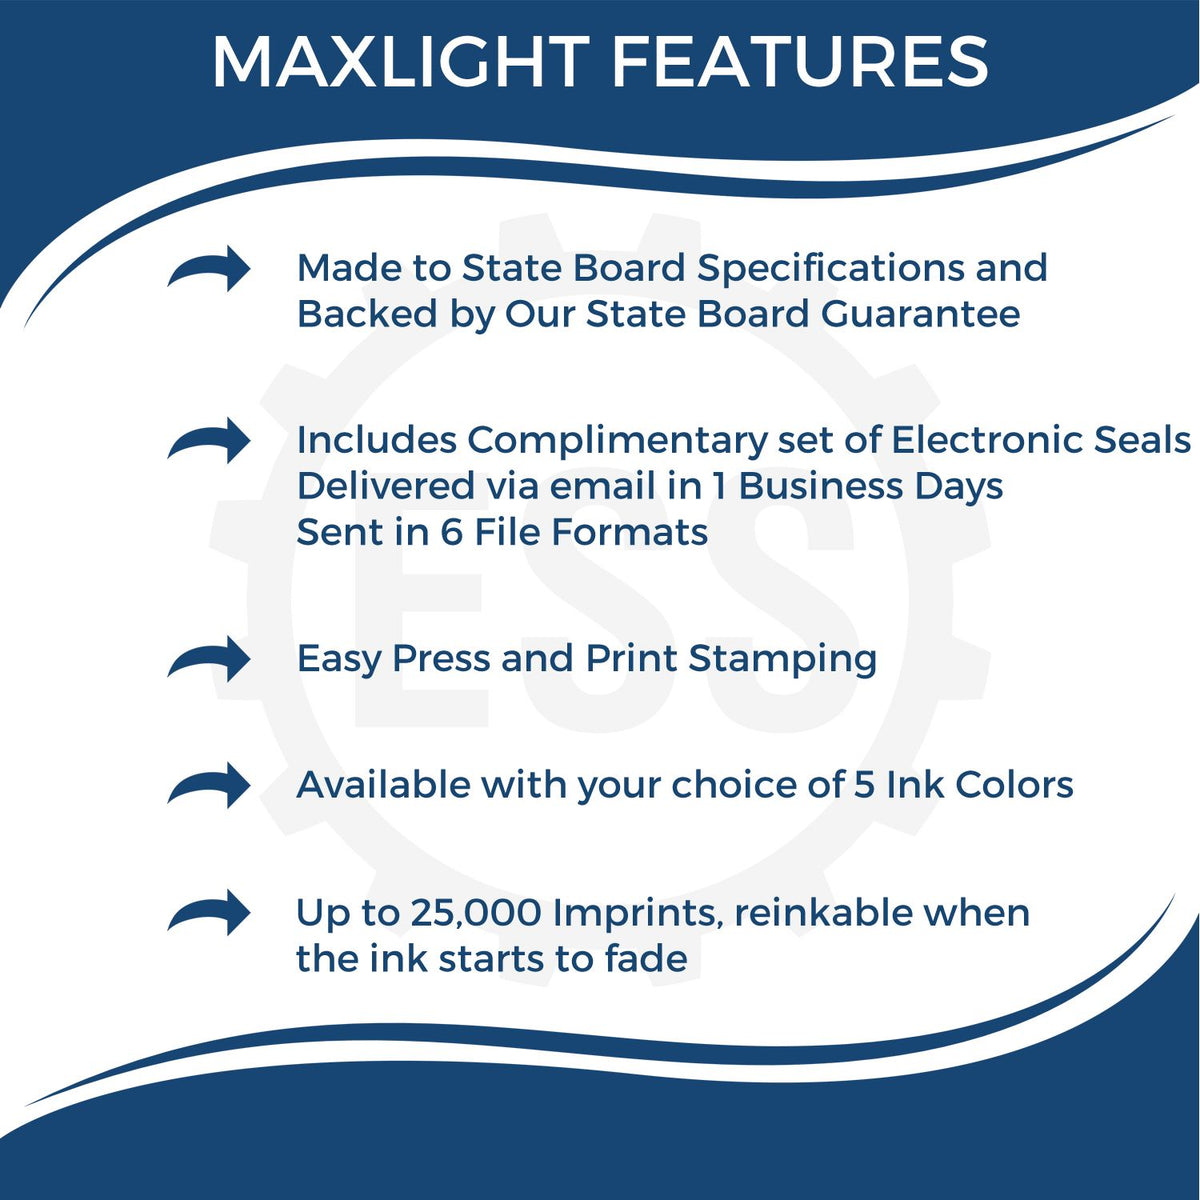 A picture of an infographic highlighting the selling points for the MaxLight Premium Pre-Inked Kansas State Seal Notarial Stamp